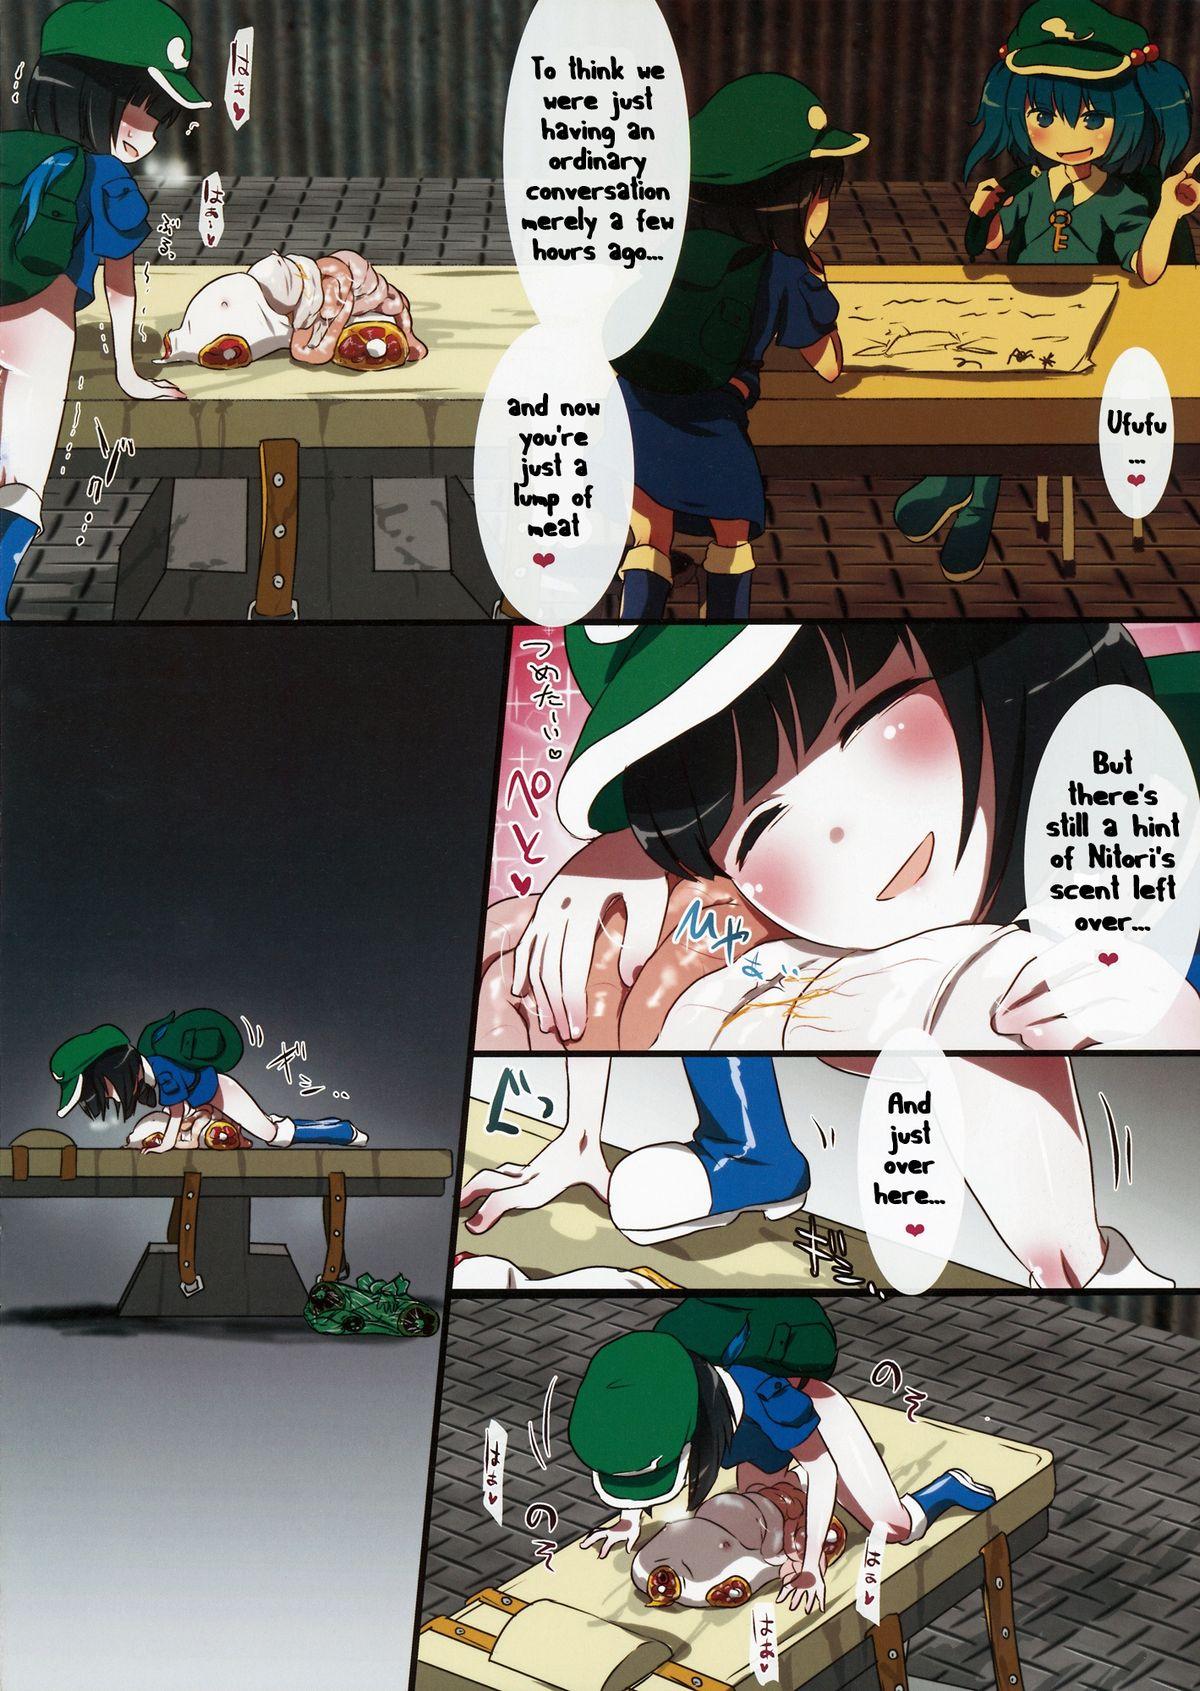 Pain 0210564801 - Touhou project Hot Girl - Page 10